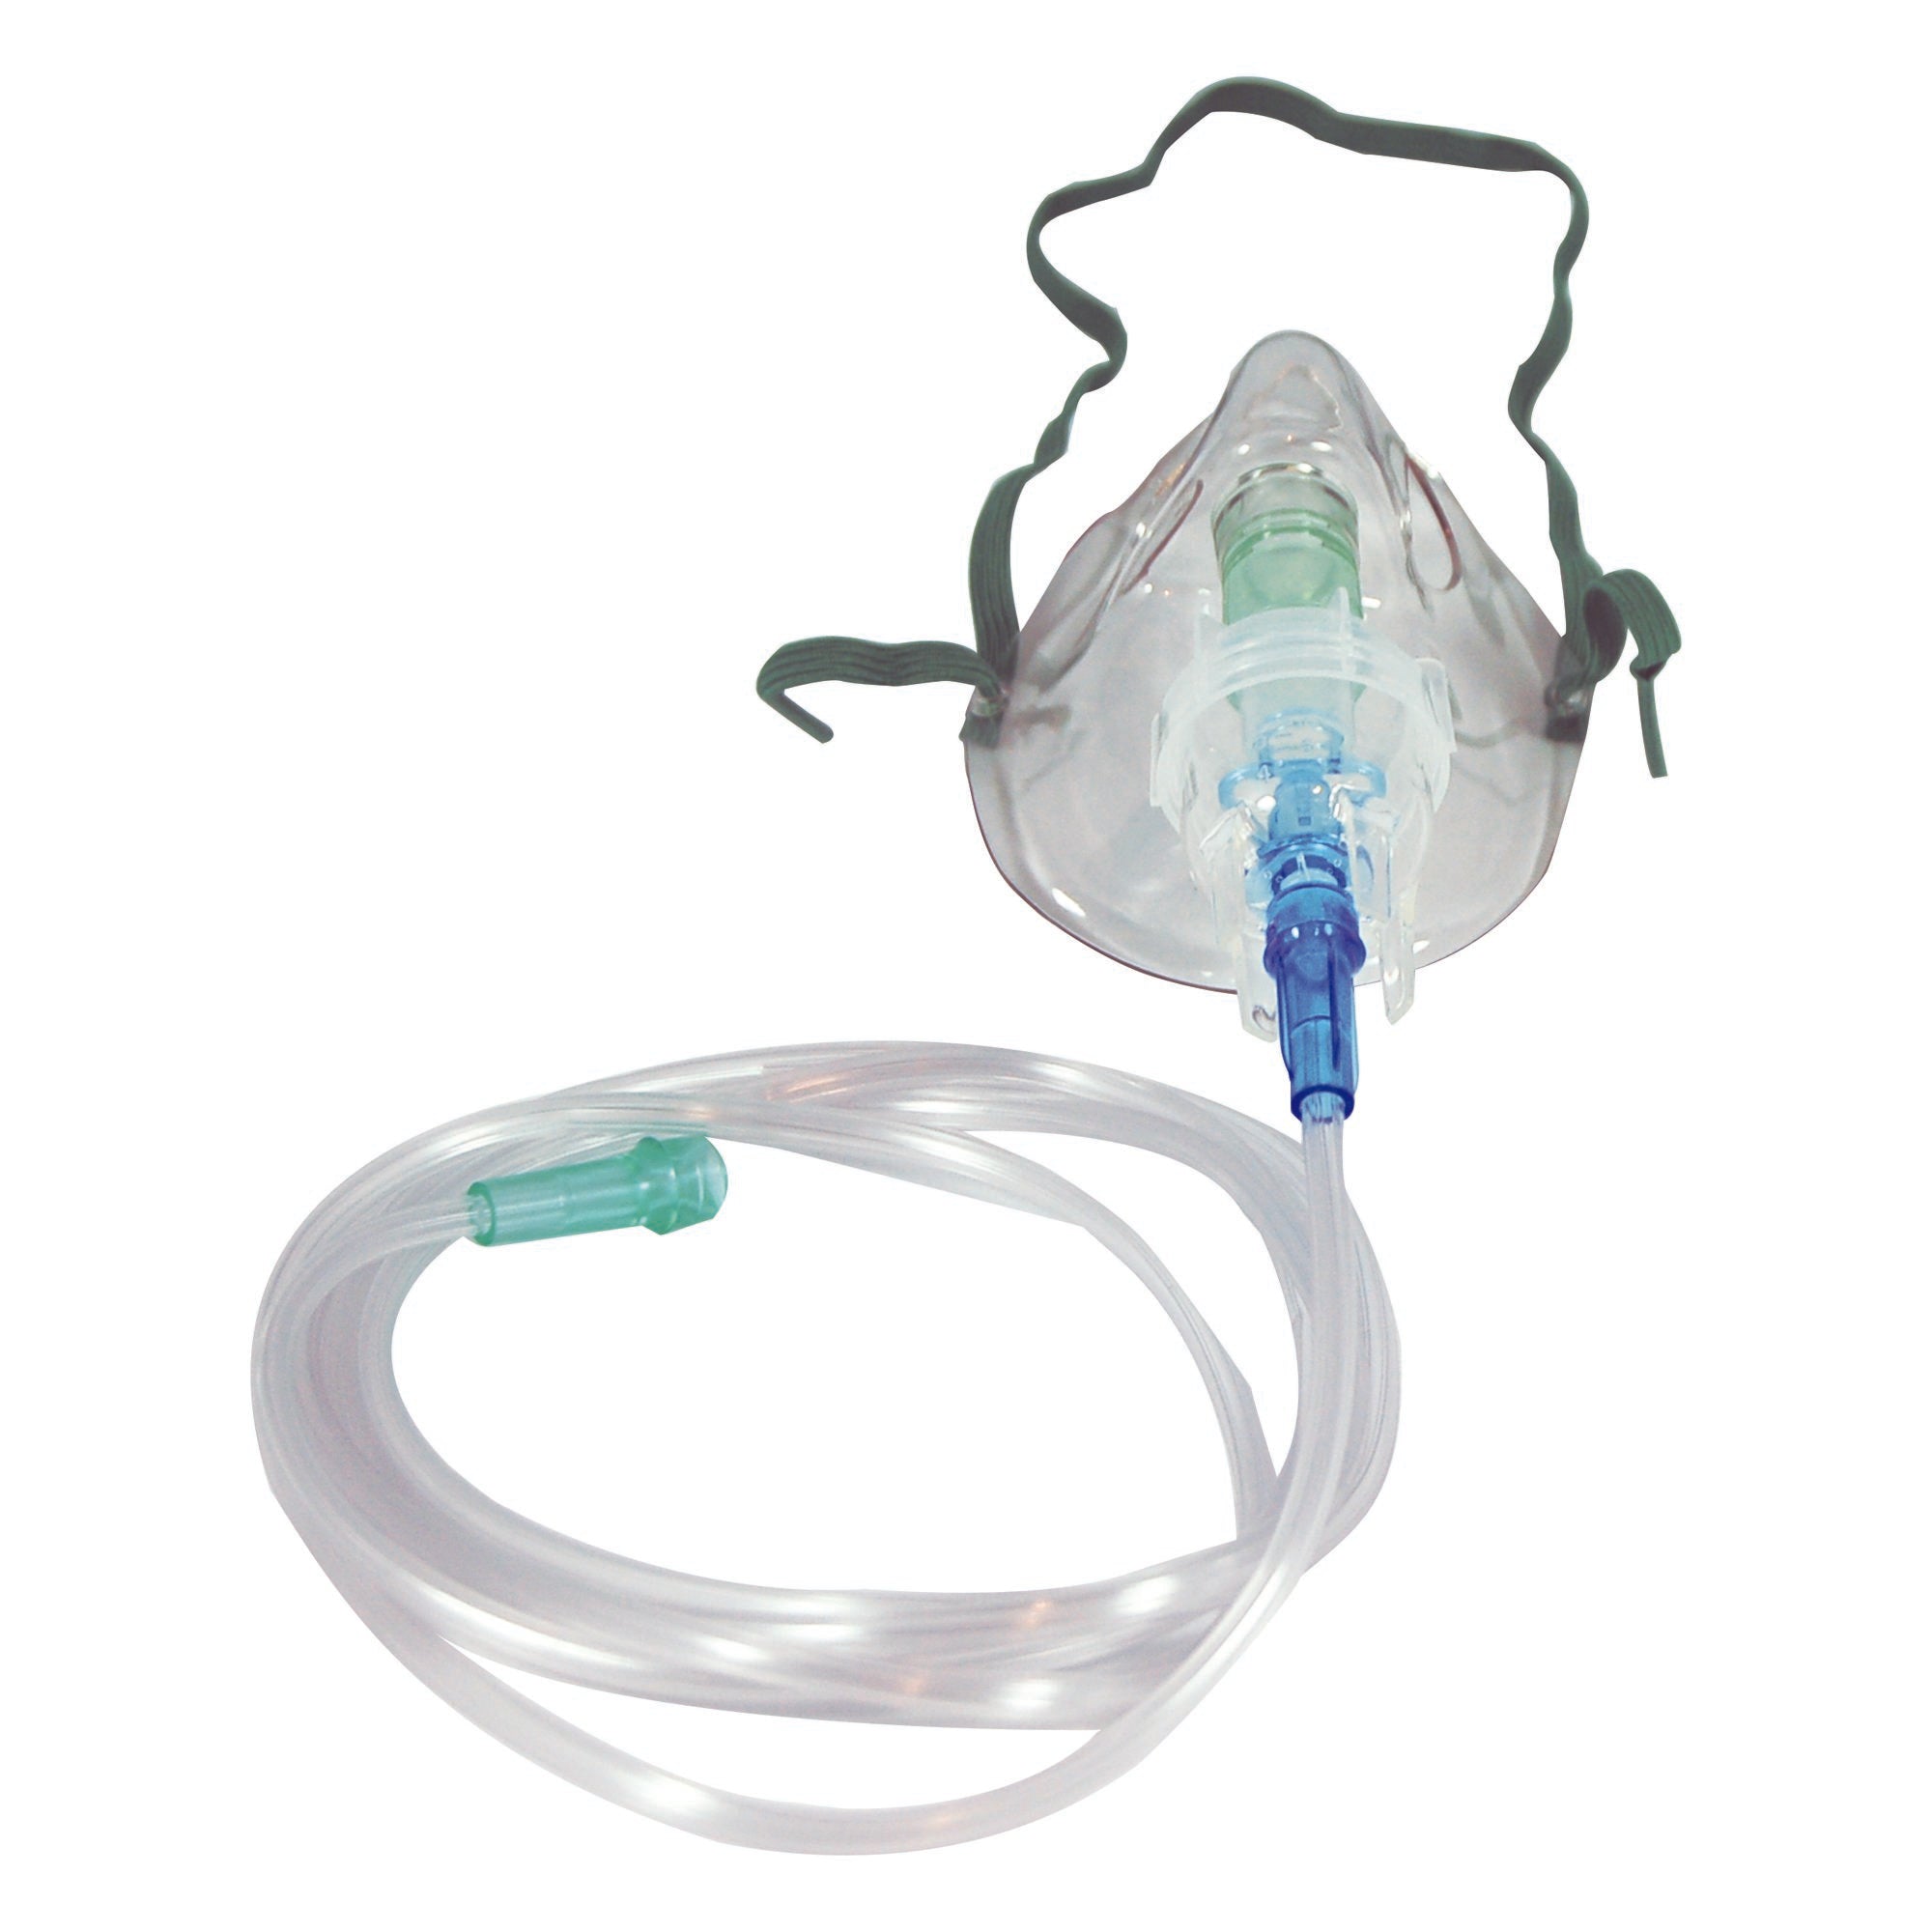 Nebulizer Kit with Mask and Tubing